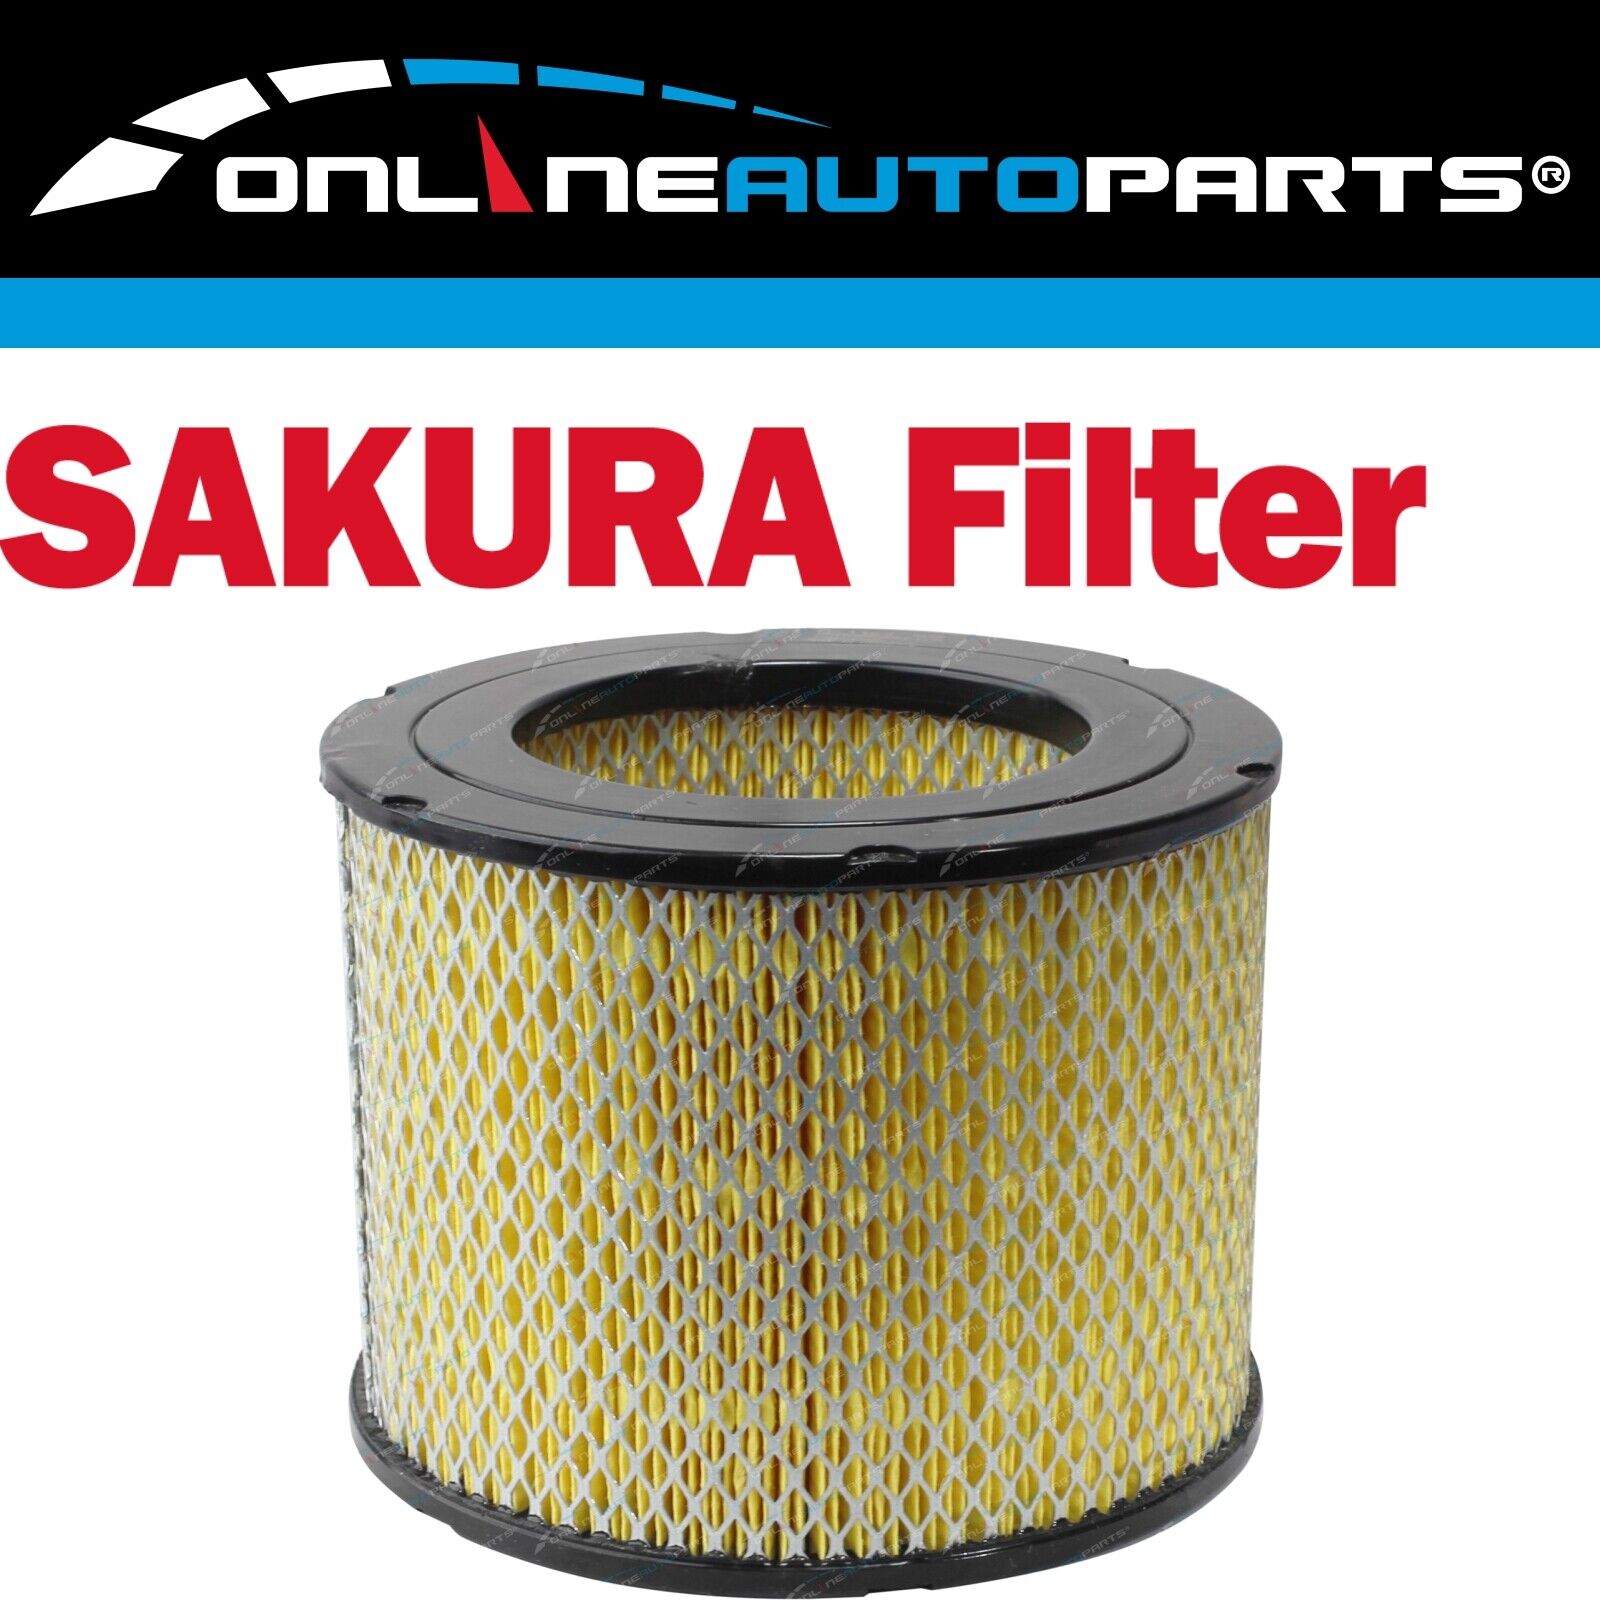 Air Filter Cleaner for Hilux Surf KZN130 4cyl 1KZ-TE 3.0L Engine 1993~1995